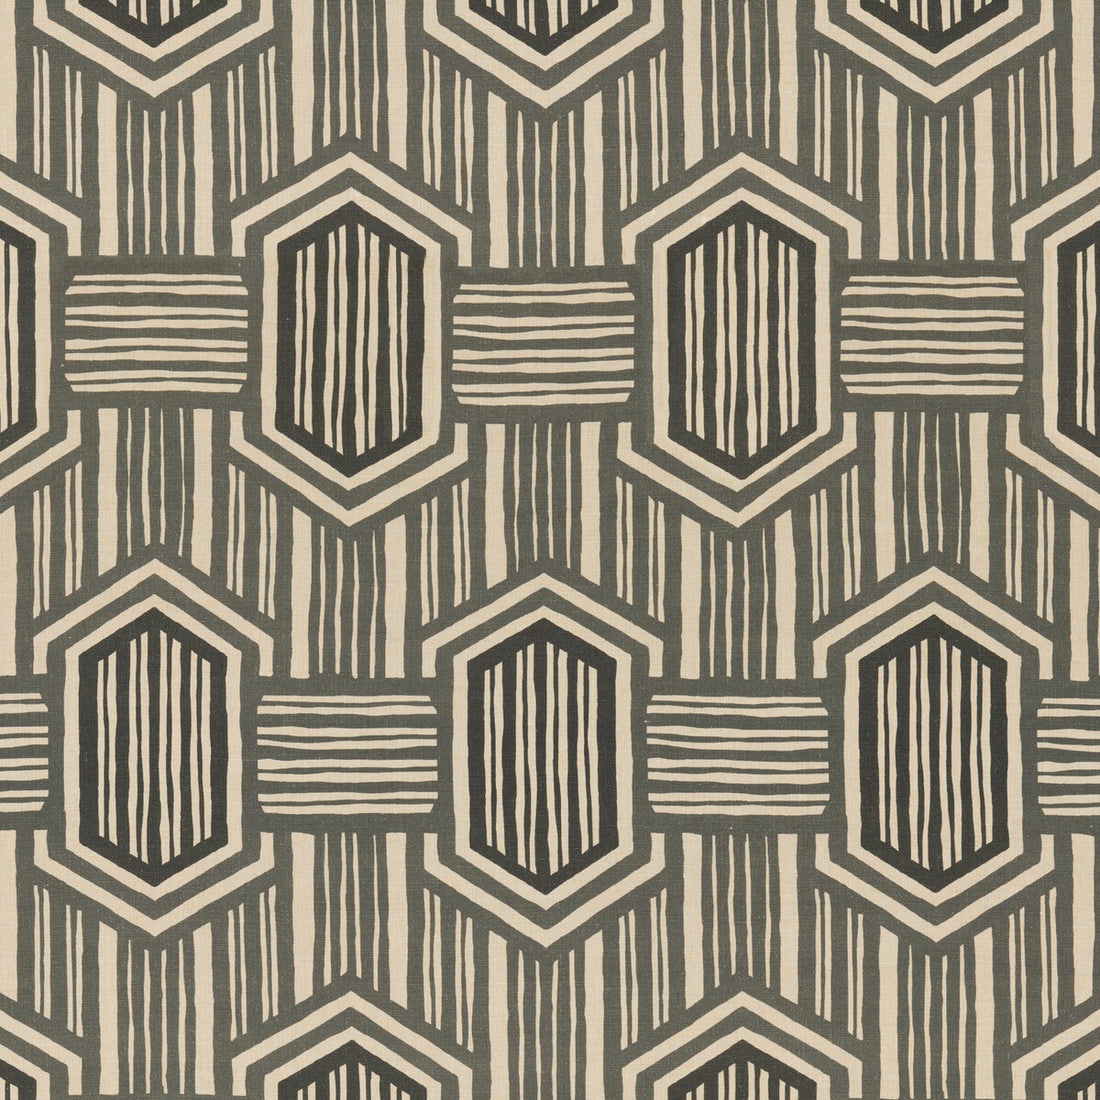 Nala fabric in charcoal color - pattern ED75037.2.0 - by Threads in the Nala Prints collection